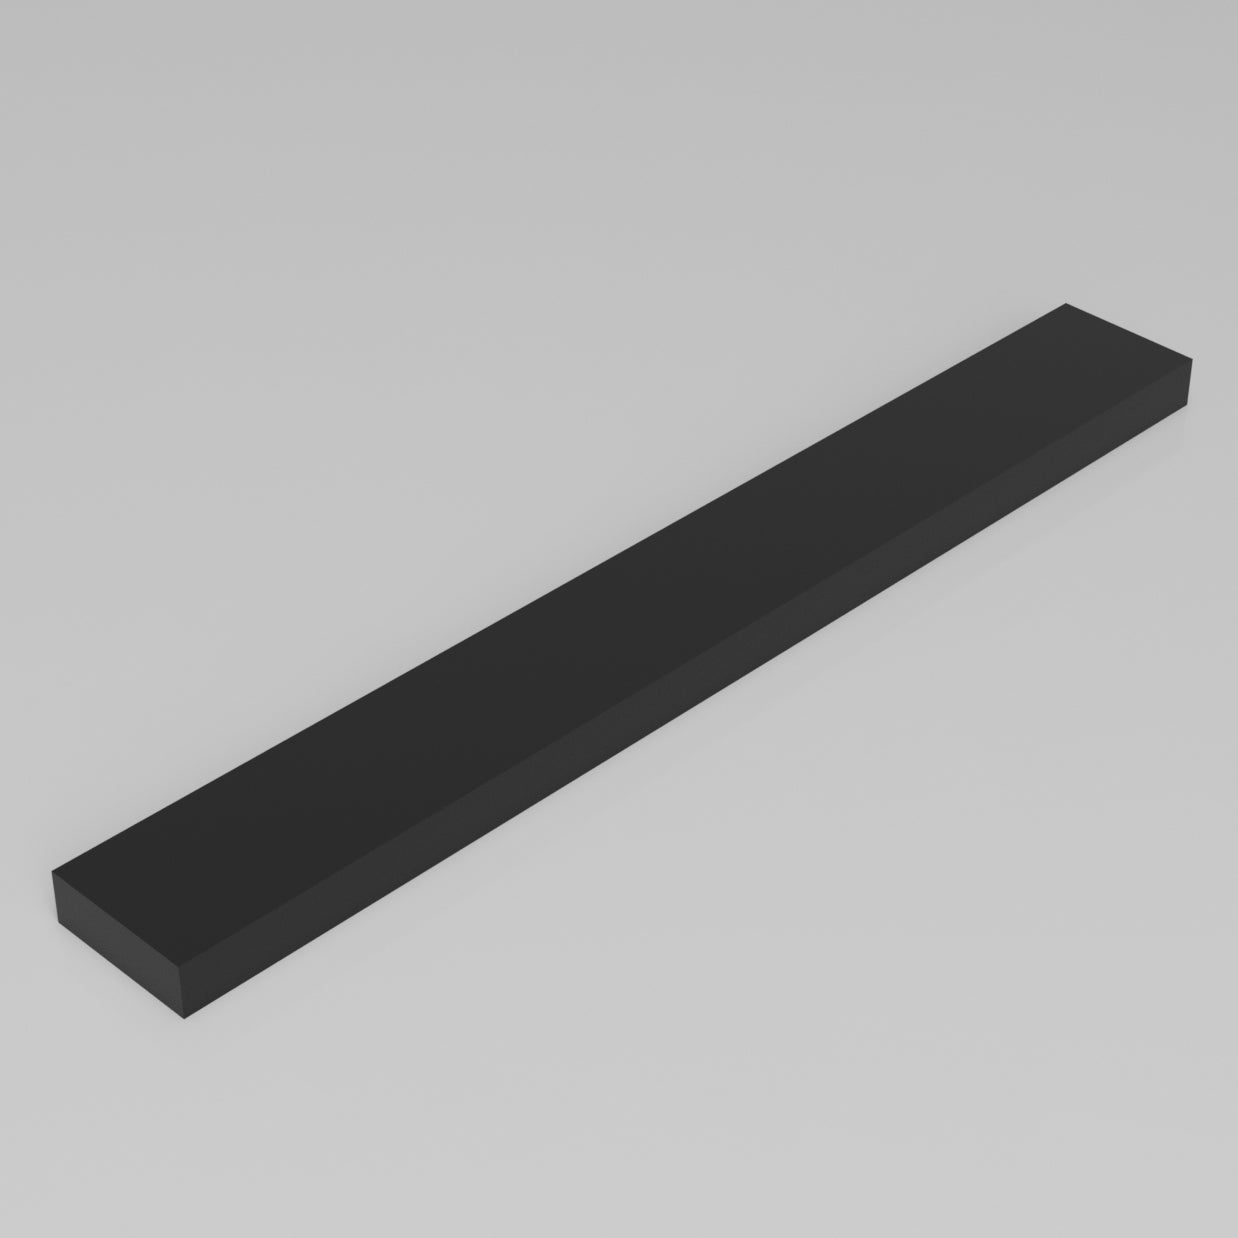 Machinable Wax Rectangular Block Front View 1 Inch by 3 Inch by 24 Inch